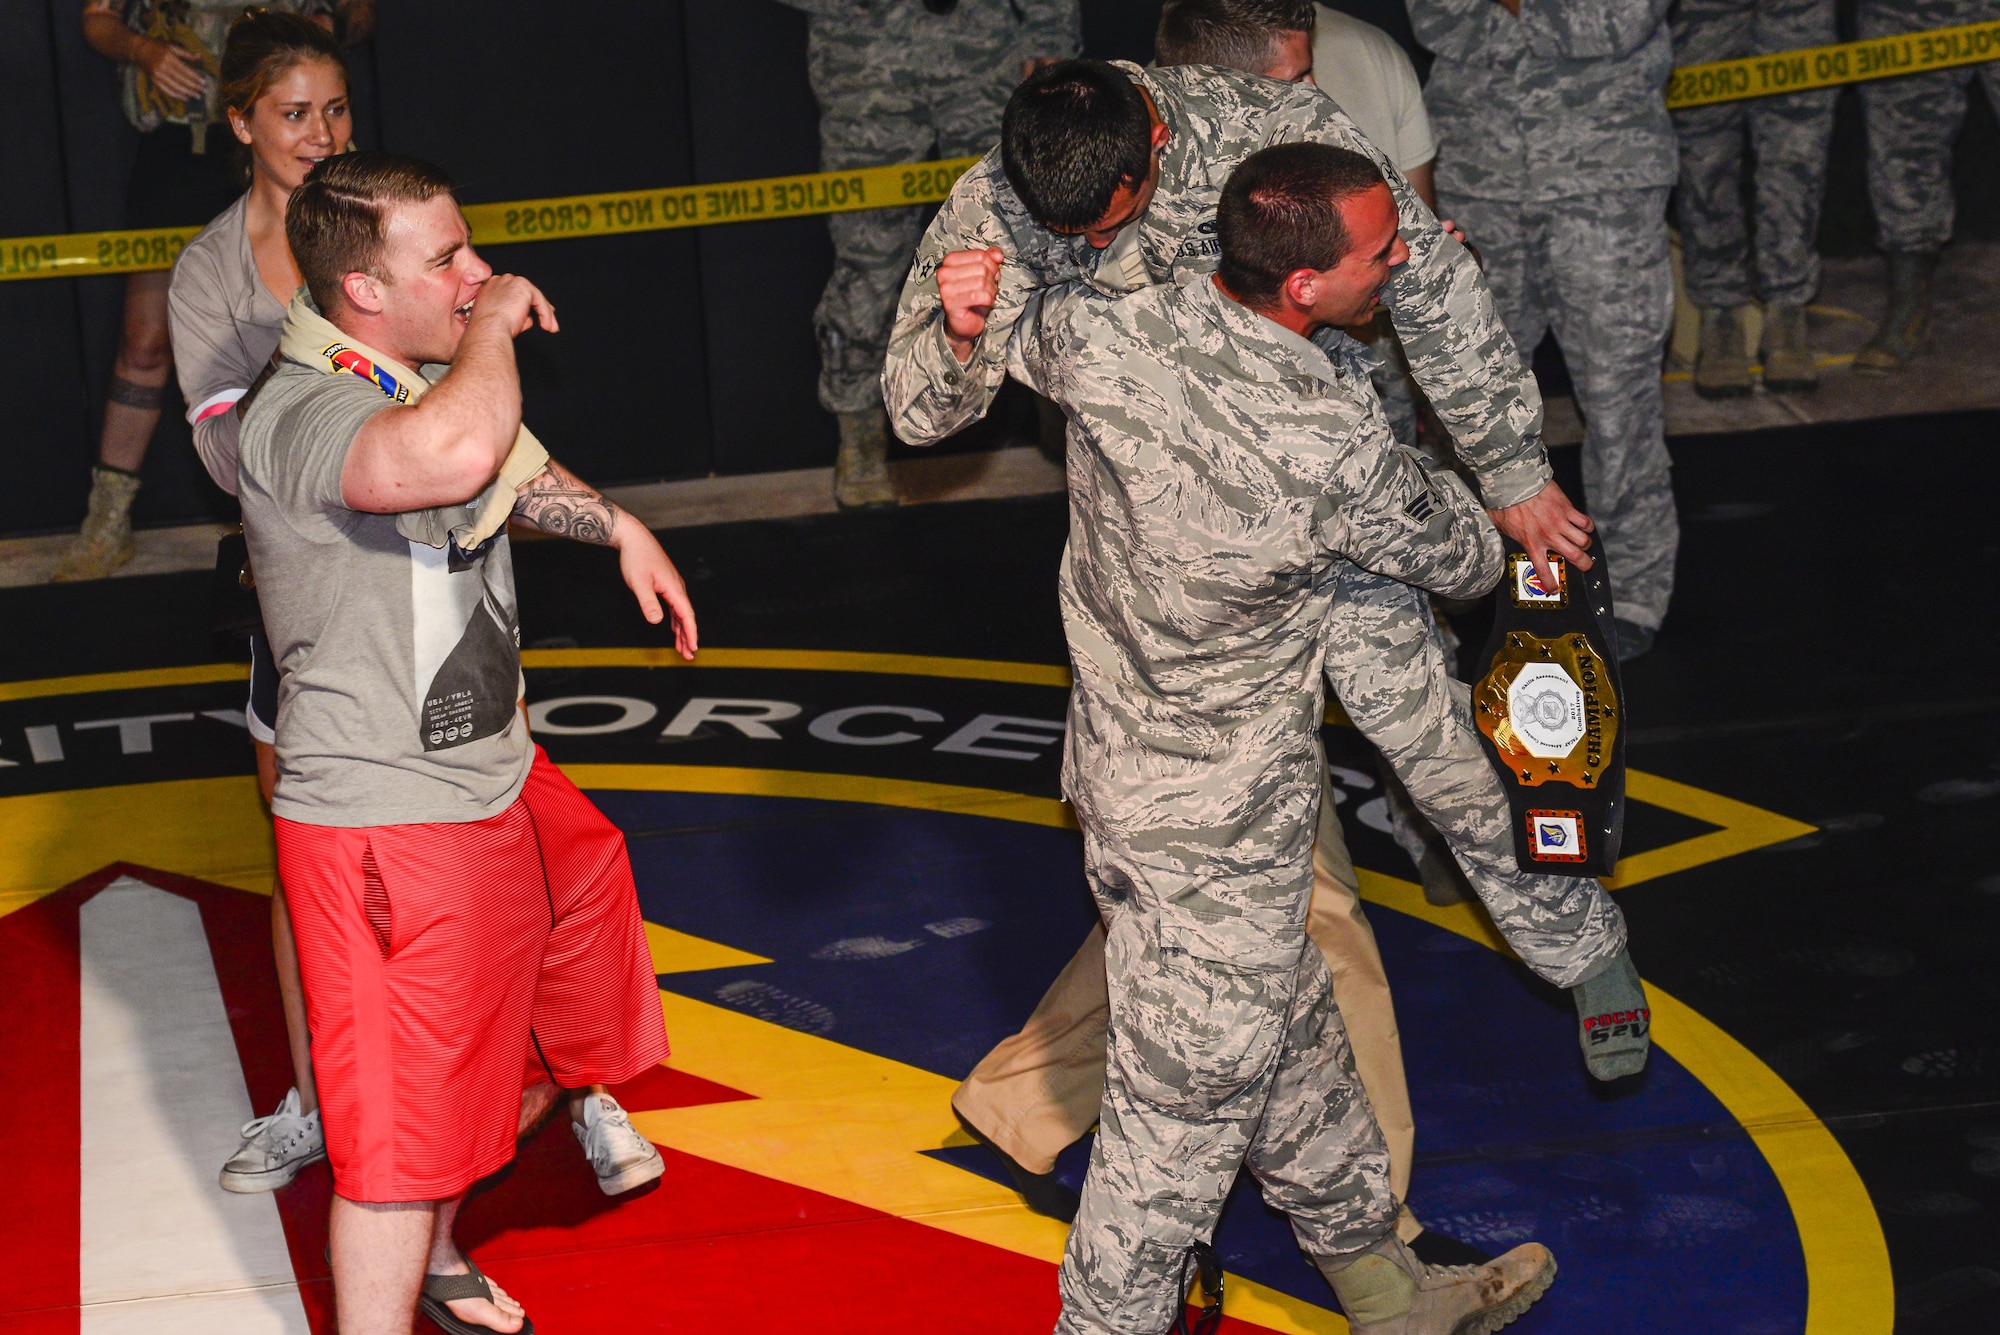 Members from the 35th Security Forces Squadron congratulate Airman Sergio Miranda, a 35th SFS entry controller, after winning the belt and title of the 2017 Combatives Champion during the second annual Security Forces Advanced Combat Skills Assessment held at the Security Forces Regional Training Center at Andersen Air Force Base, Guam, June 8, 2017. More than 100 Airmen and Soldiers throughout the U.S. Pacific Command’s area of responsibility gathered to compete in five different categories: weapons, tactics, combat fitness, mental and physical challenge and military working dog handling. (U.S. Air Force photo by Airman 1st Class Christopher Quail)